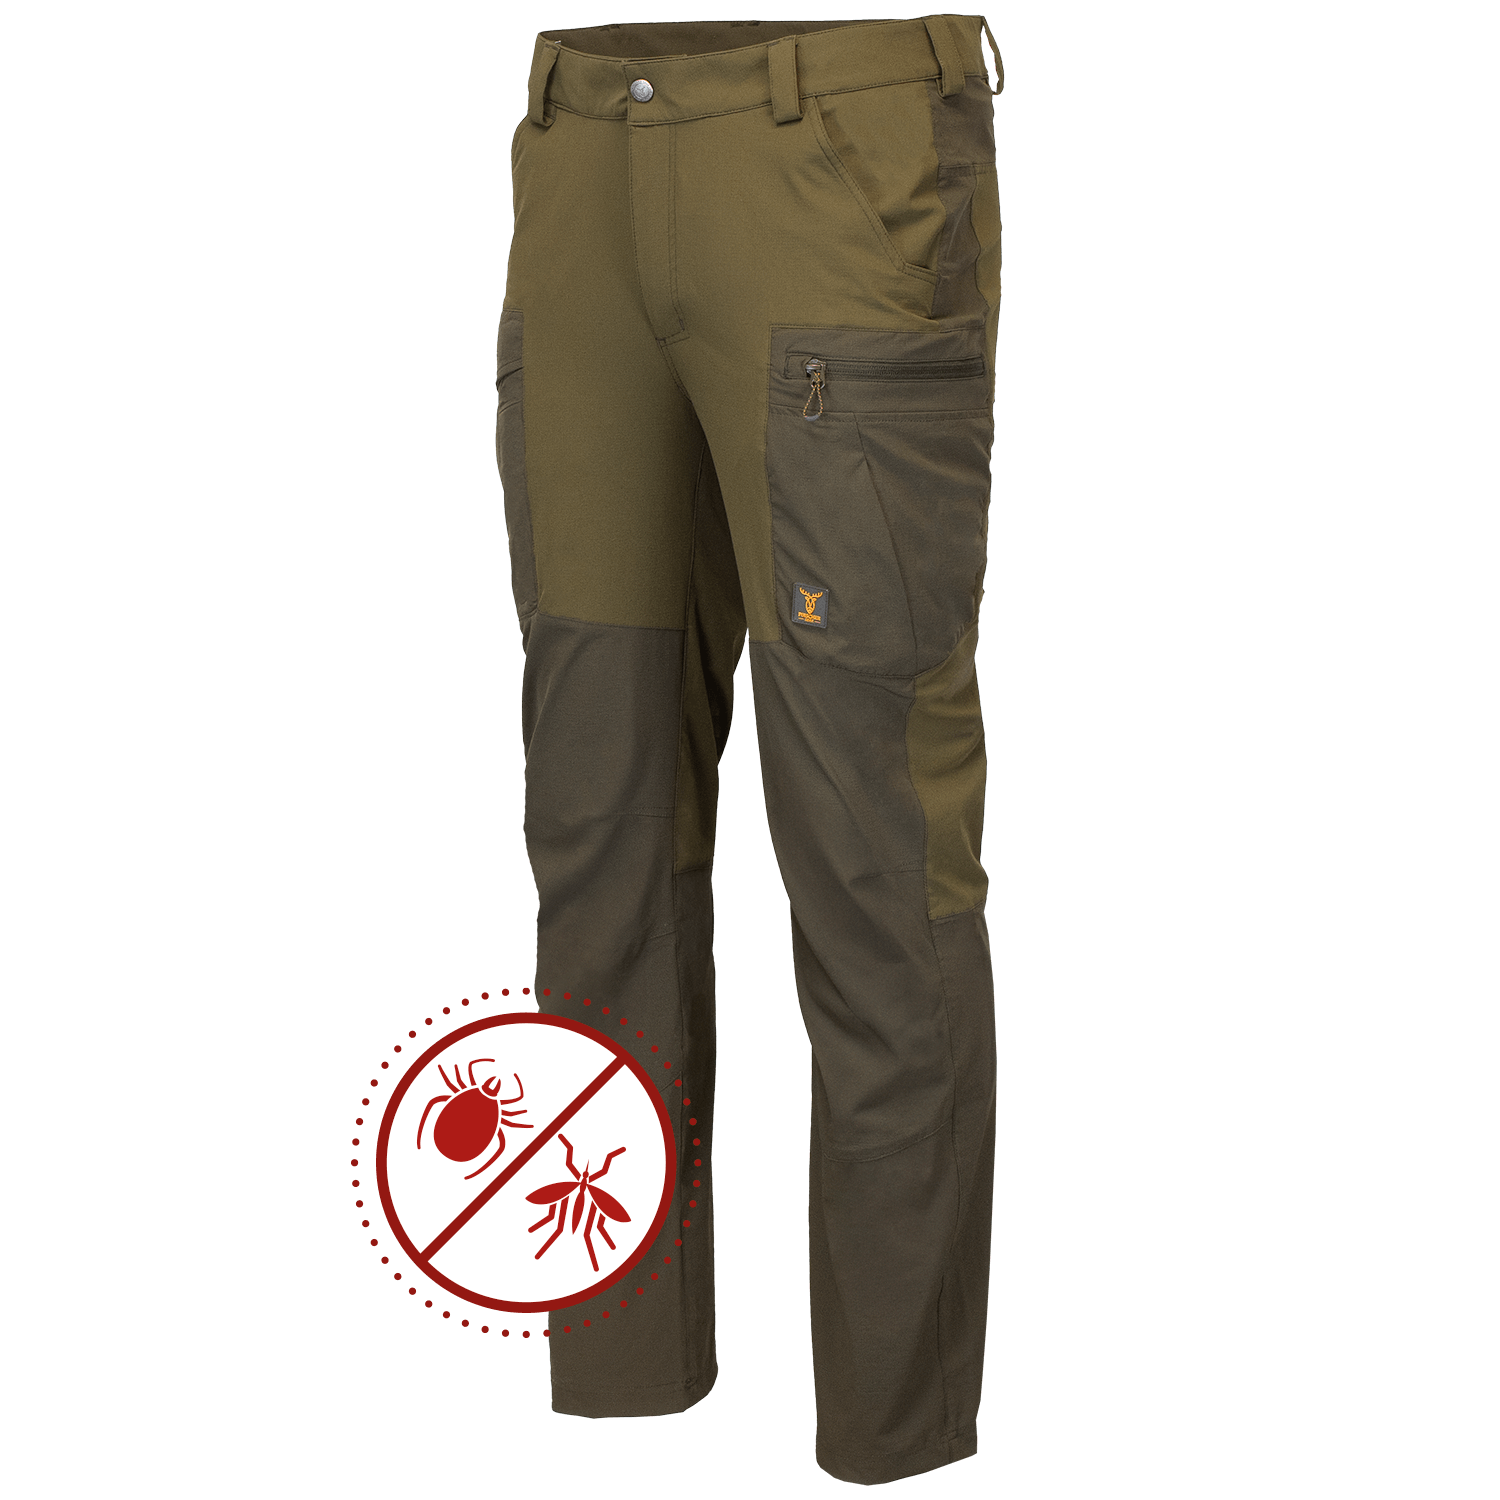 Pirscher Gear Ripstop Tanatex Pants - Insect Protection